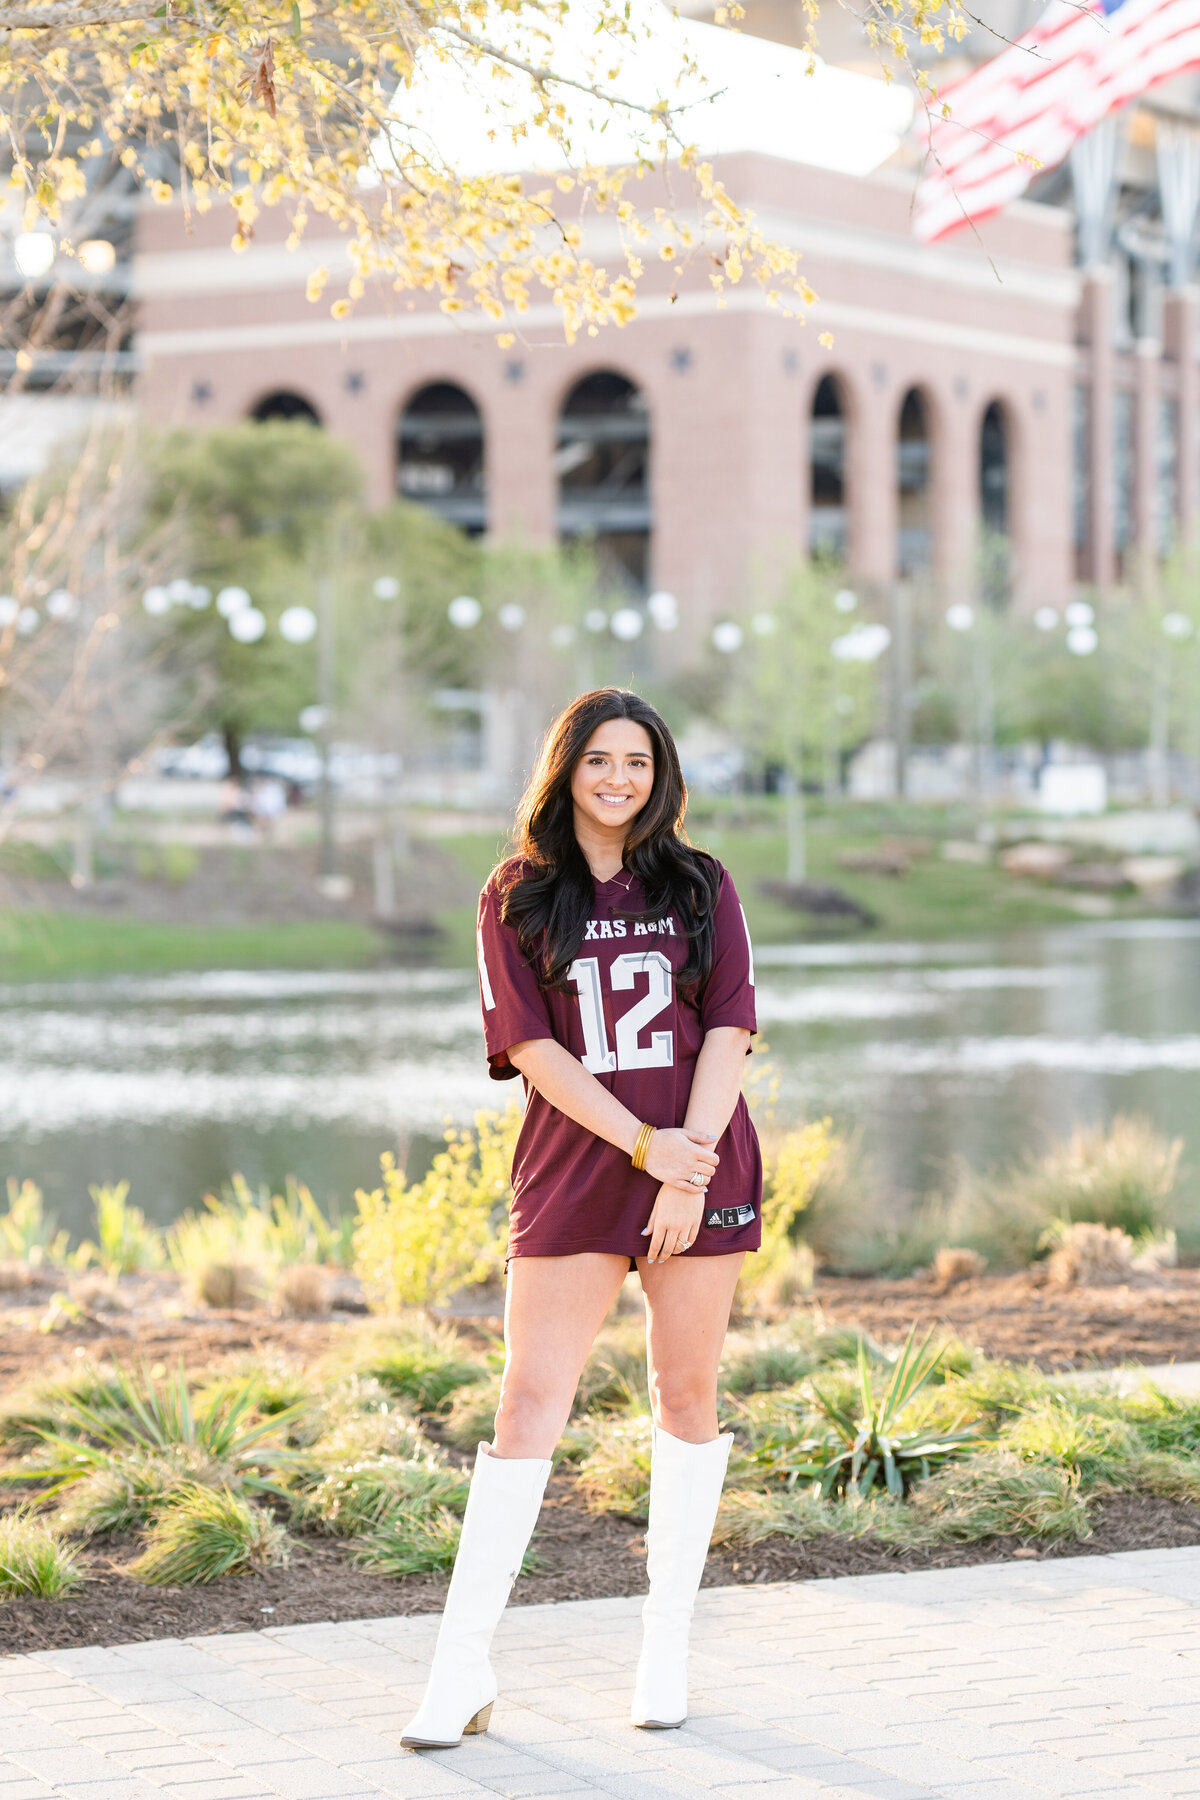 Texas A&M senior girl in maroon jersey in Aggie Park with Kyle Field in background